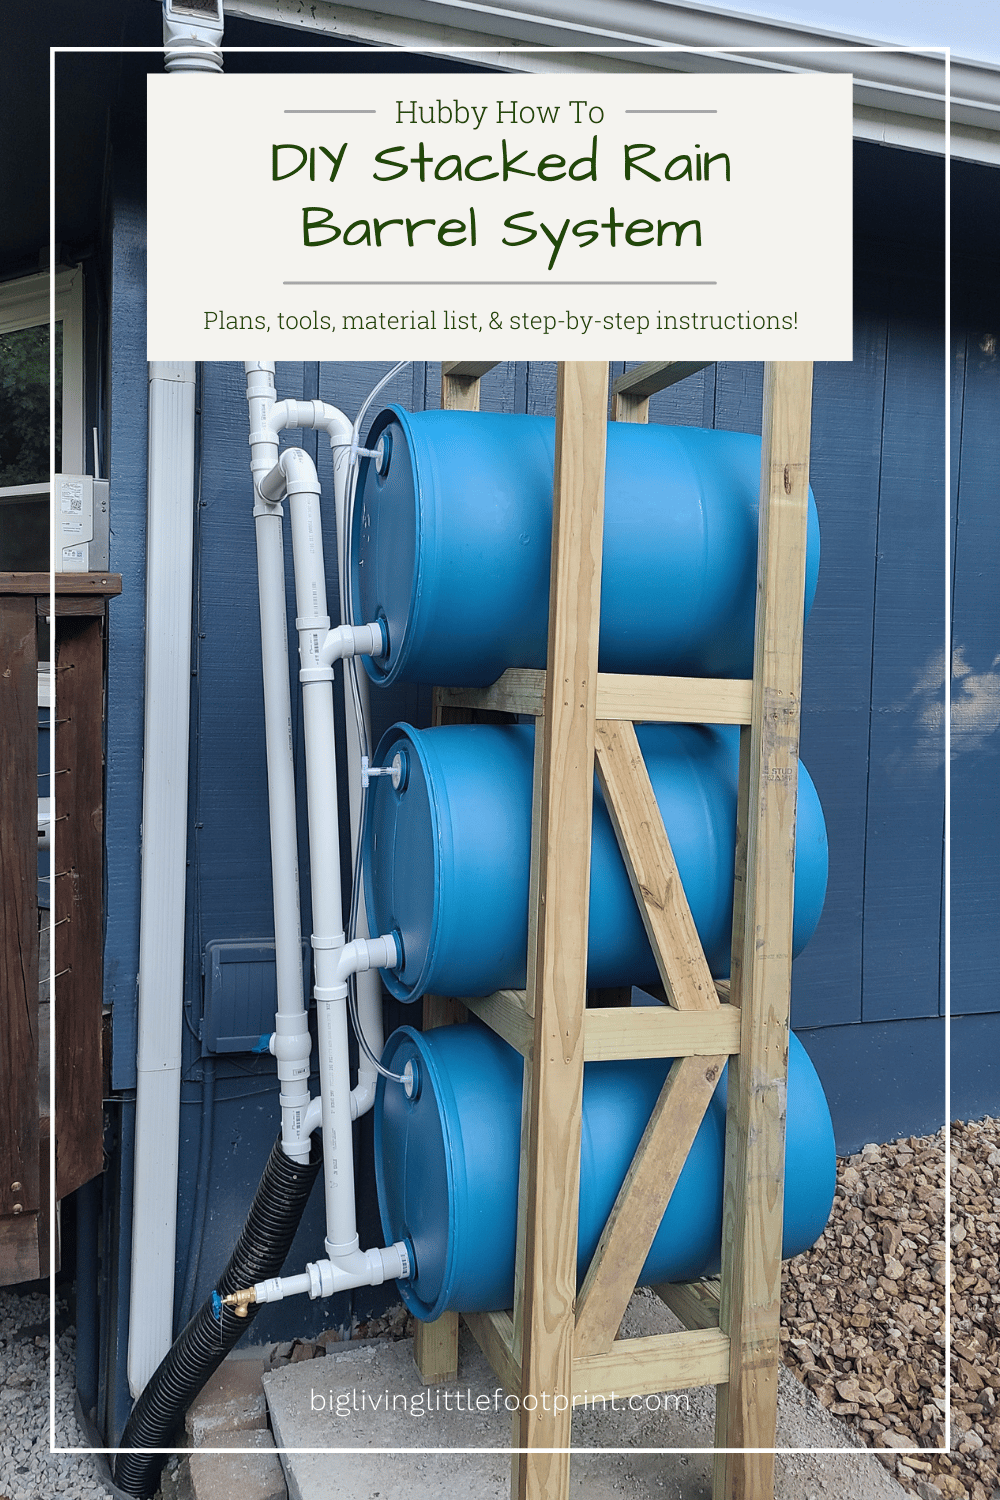 Hubby How To - DIY Stacked Rain Barrel System - Big Living